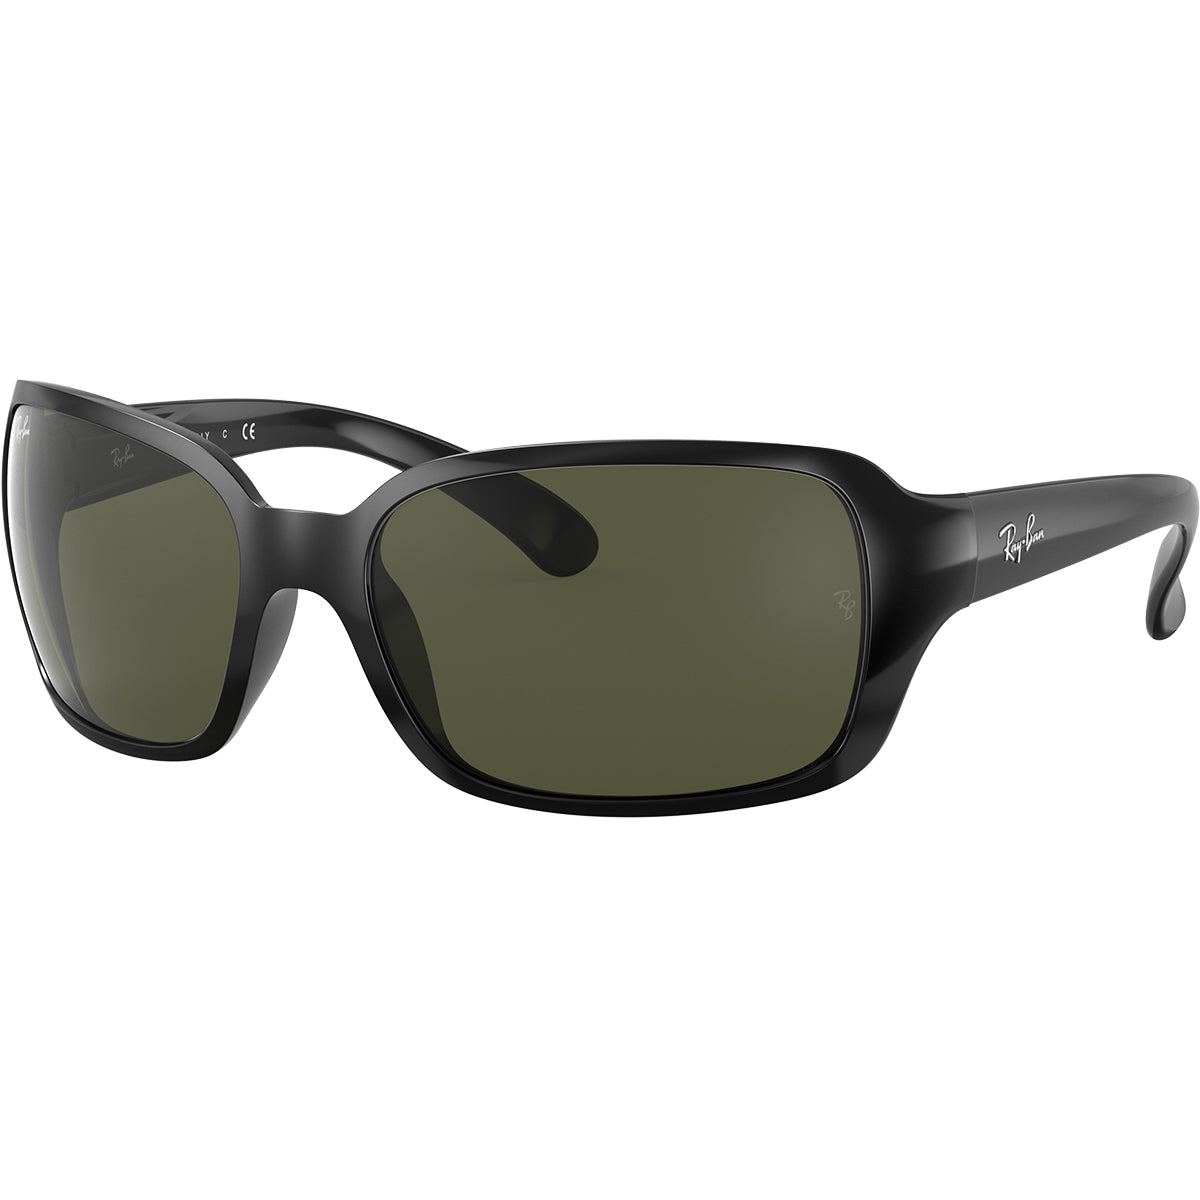 Ray-Ban RB4068 Women's Lifestyle Sunglasses-0RB4068